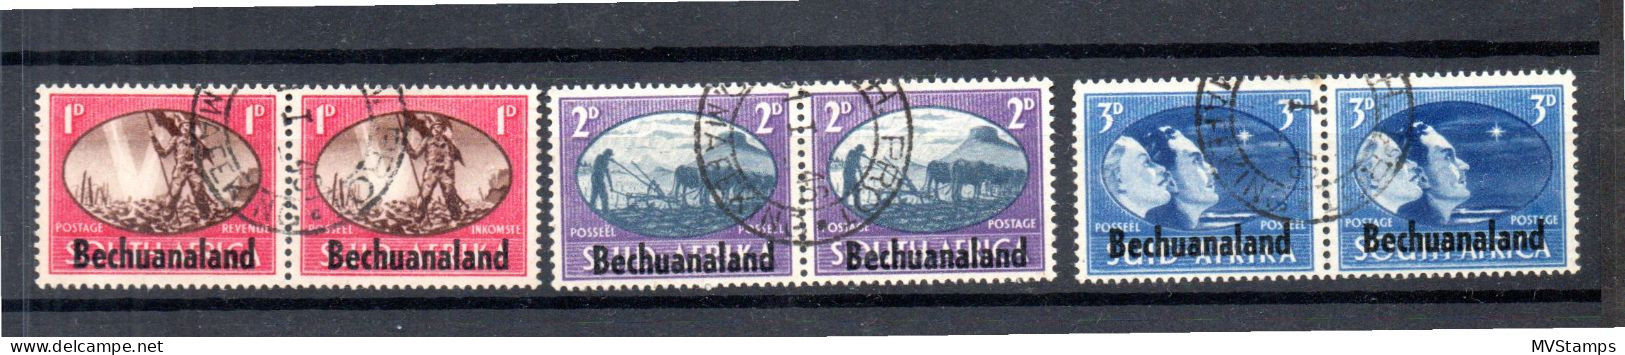 Bechuanaland 1945 Set Overprinted Pairs Stamps (Michel 112/17) Nice Used - 1885-1964 Bechuanaland Protettorato